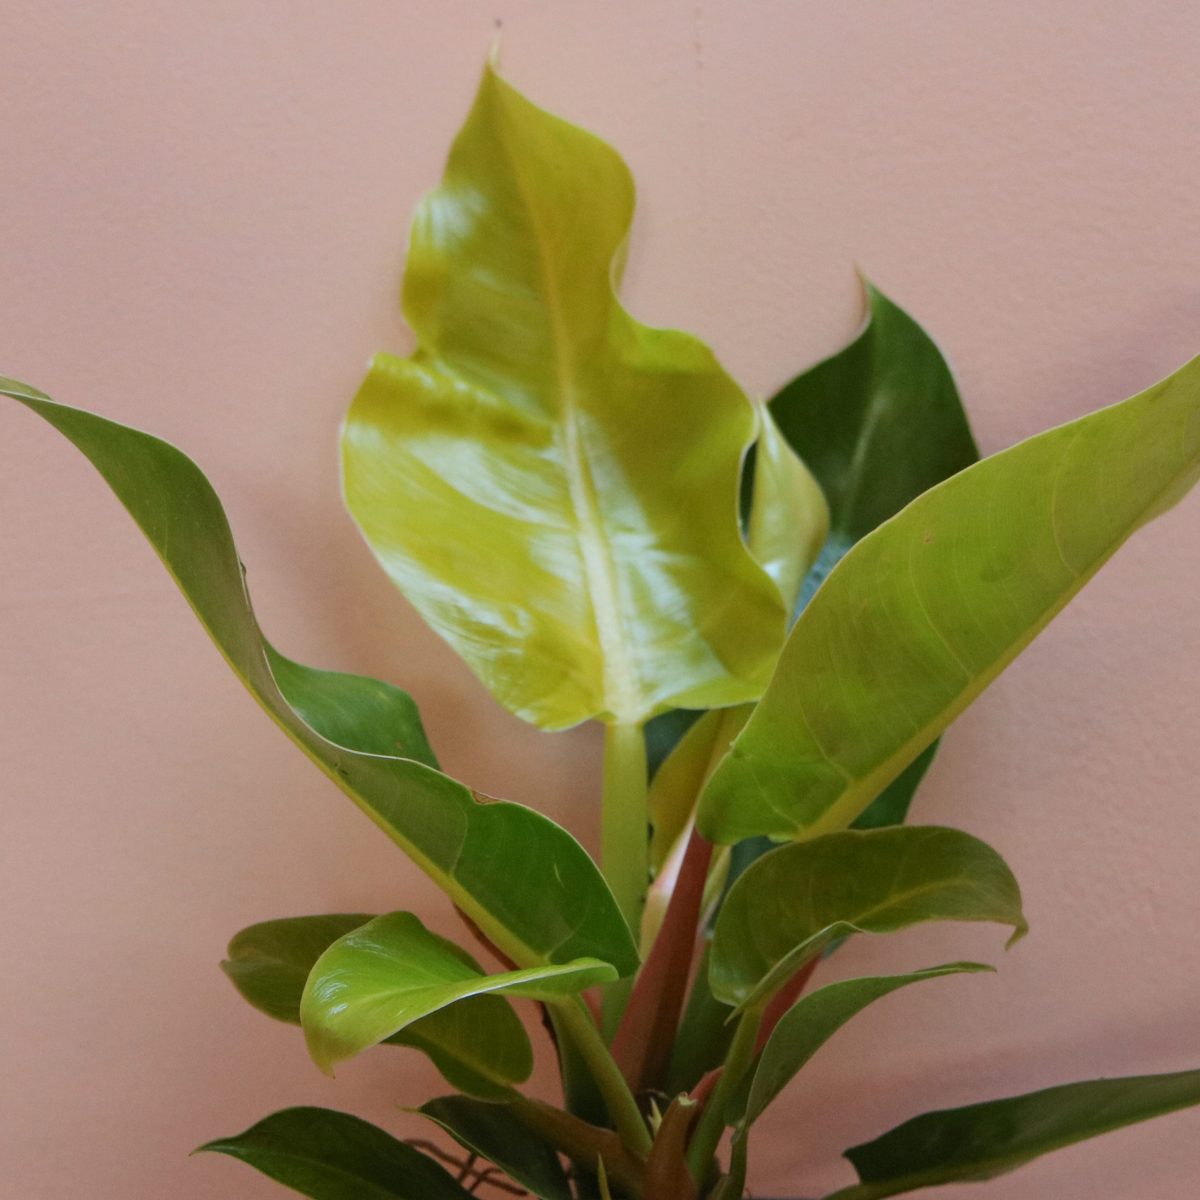 up close leaves of philodendron plant